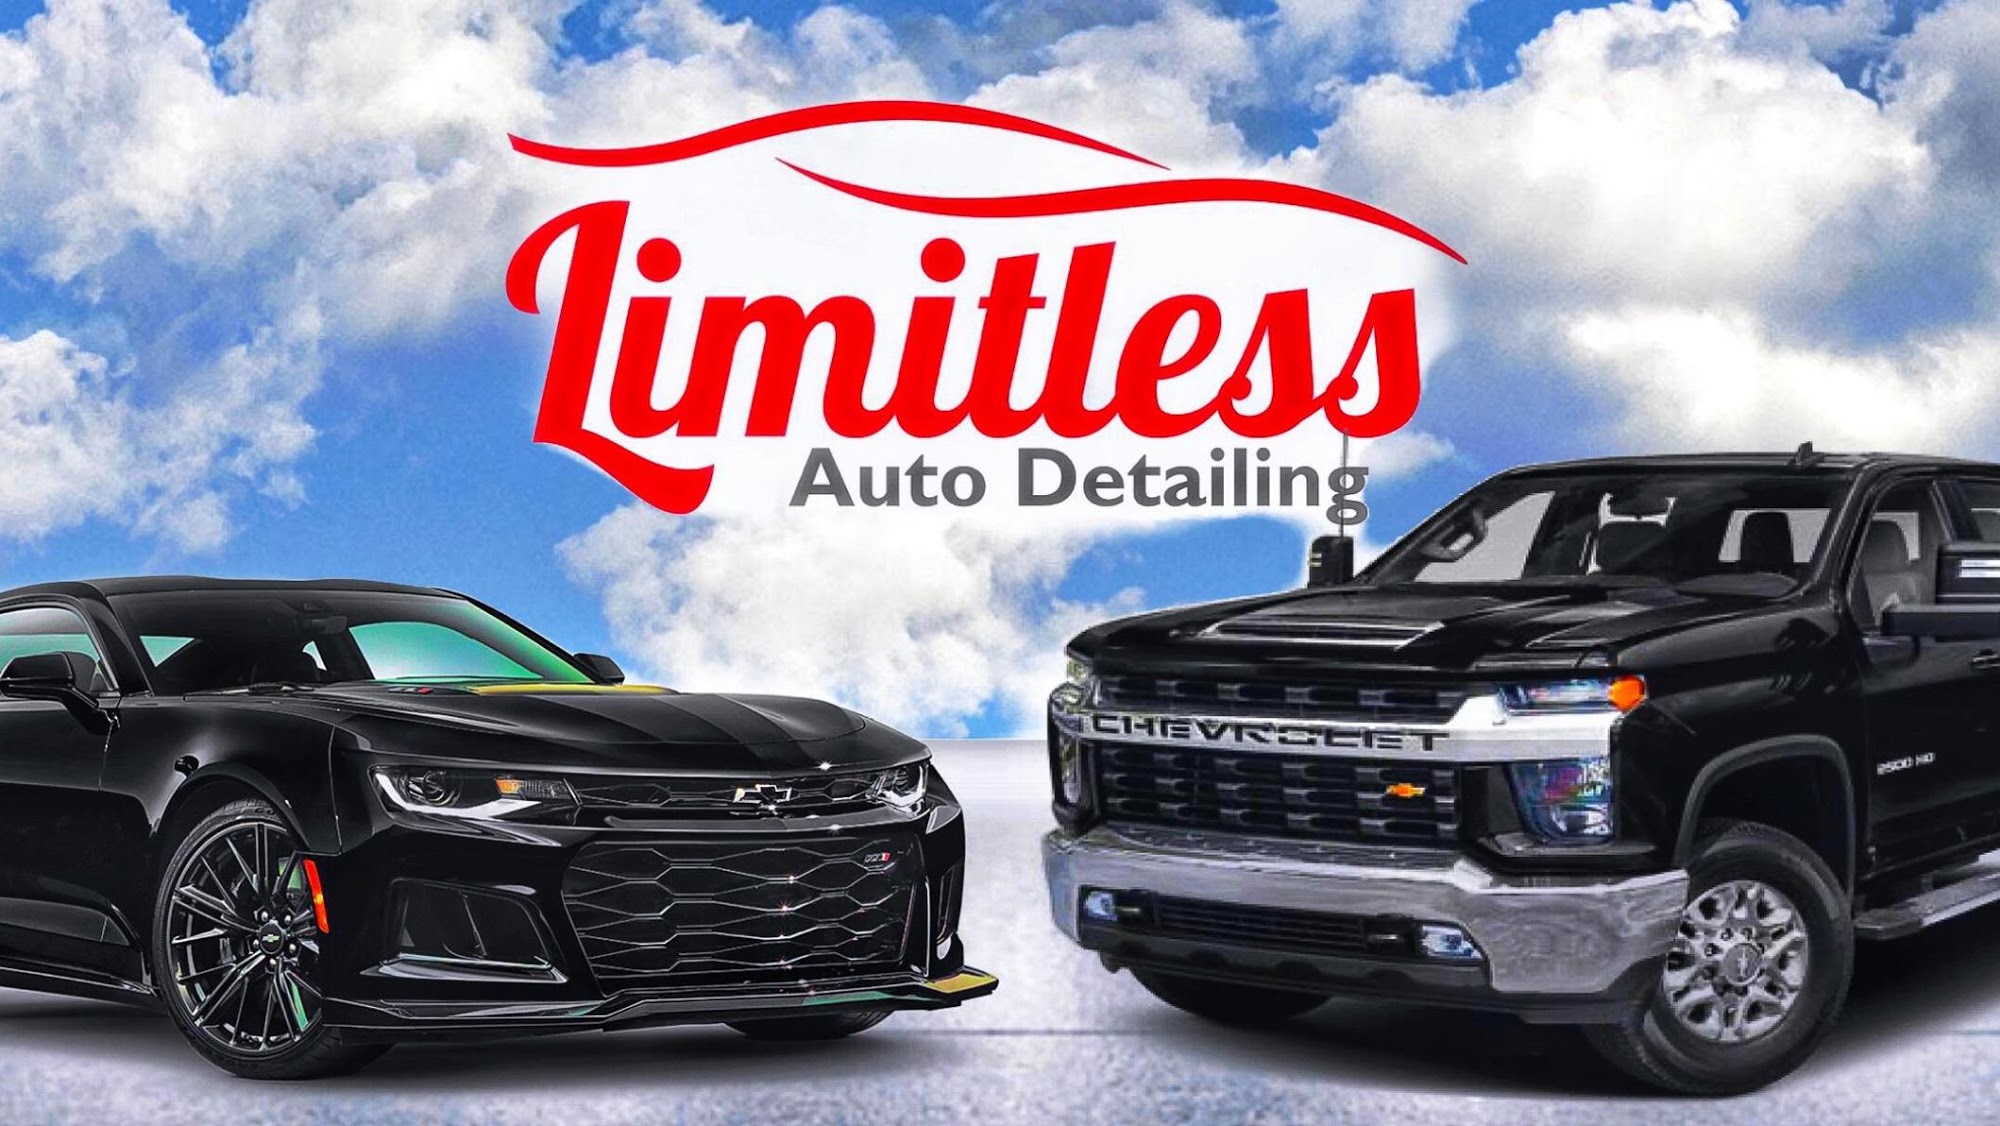 Limitless Auto Detailing